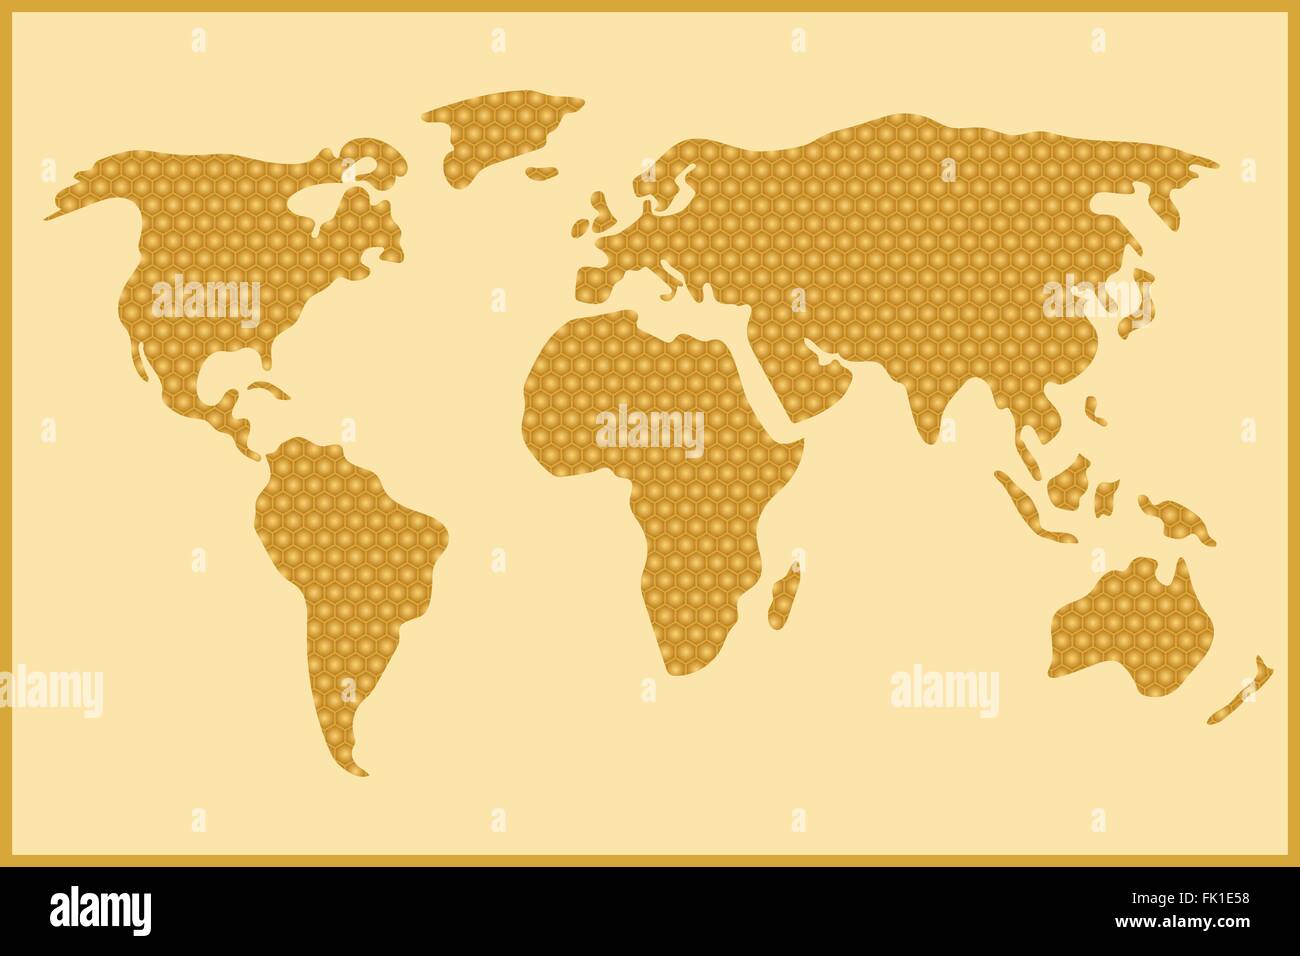 Simple and schematic world map out of honey comb, vector illustration Stock Vector